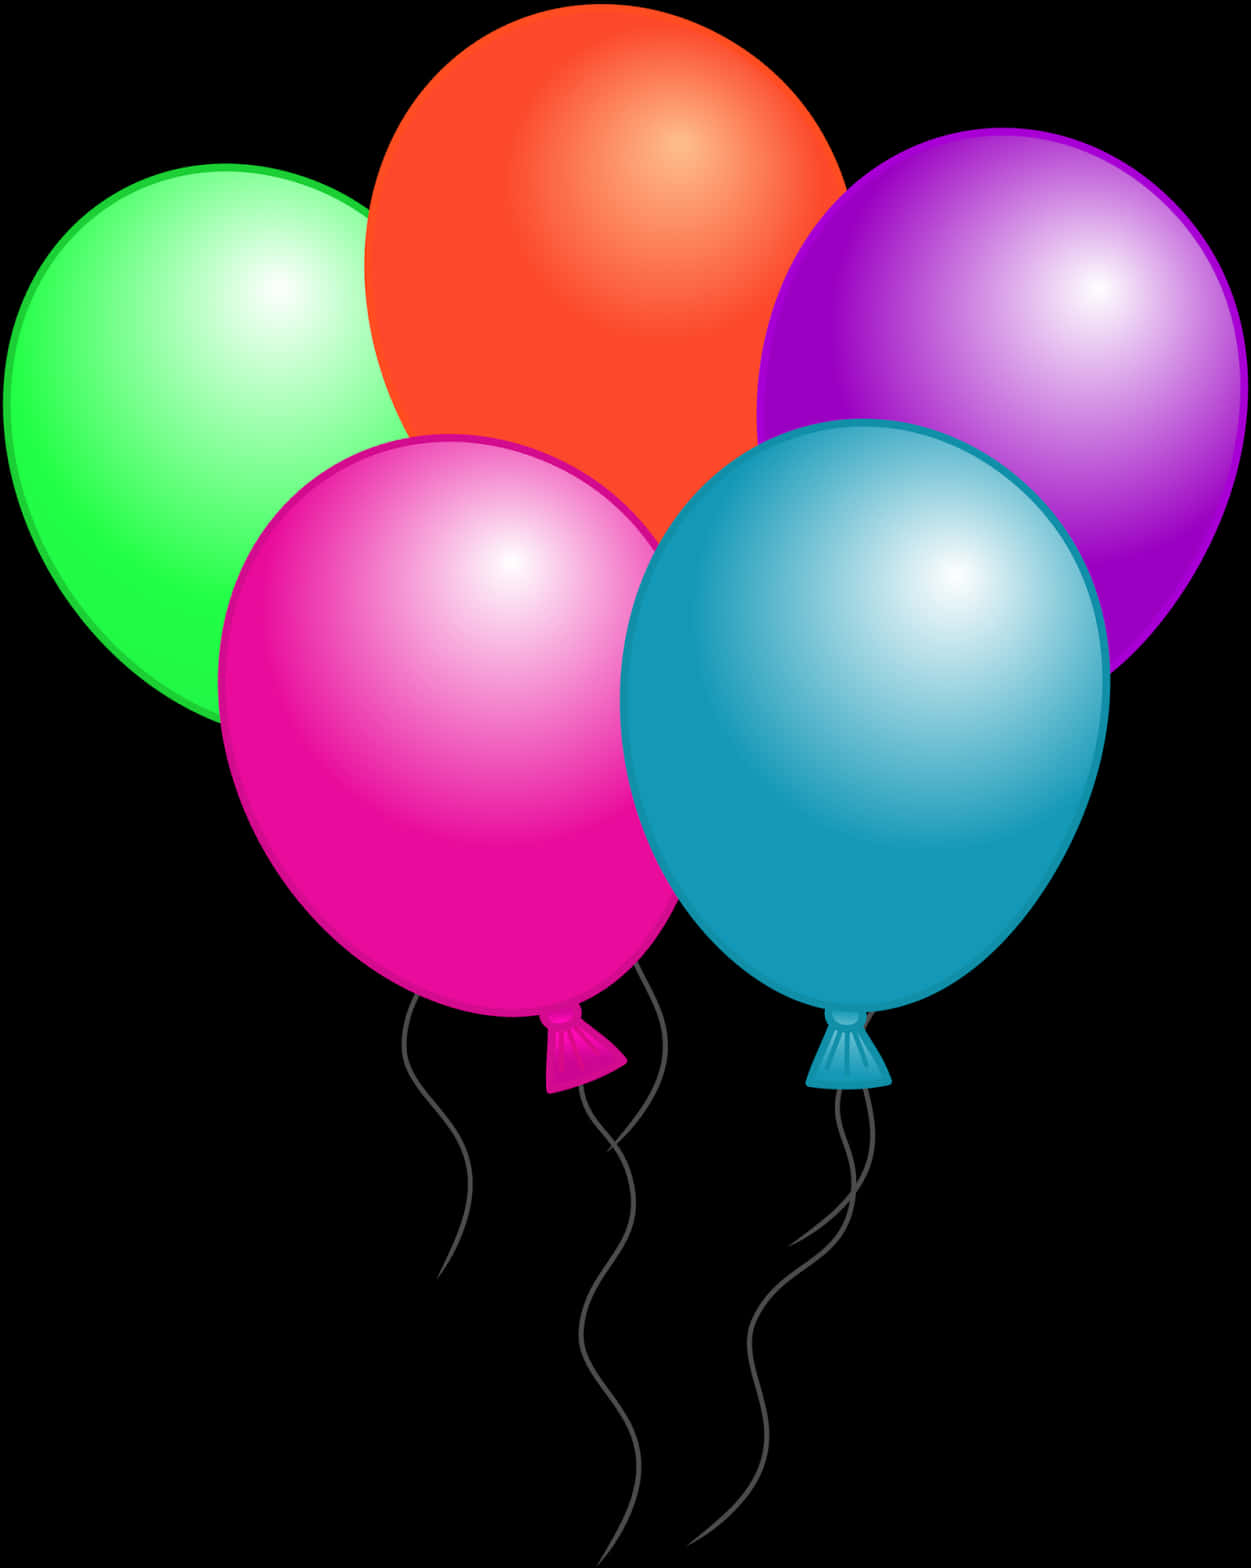 Colorful Balloons Black Background PNG